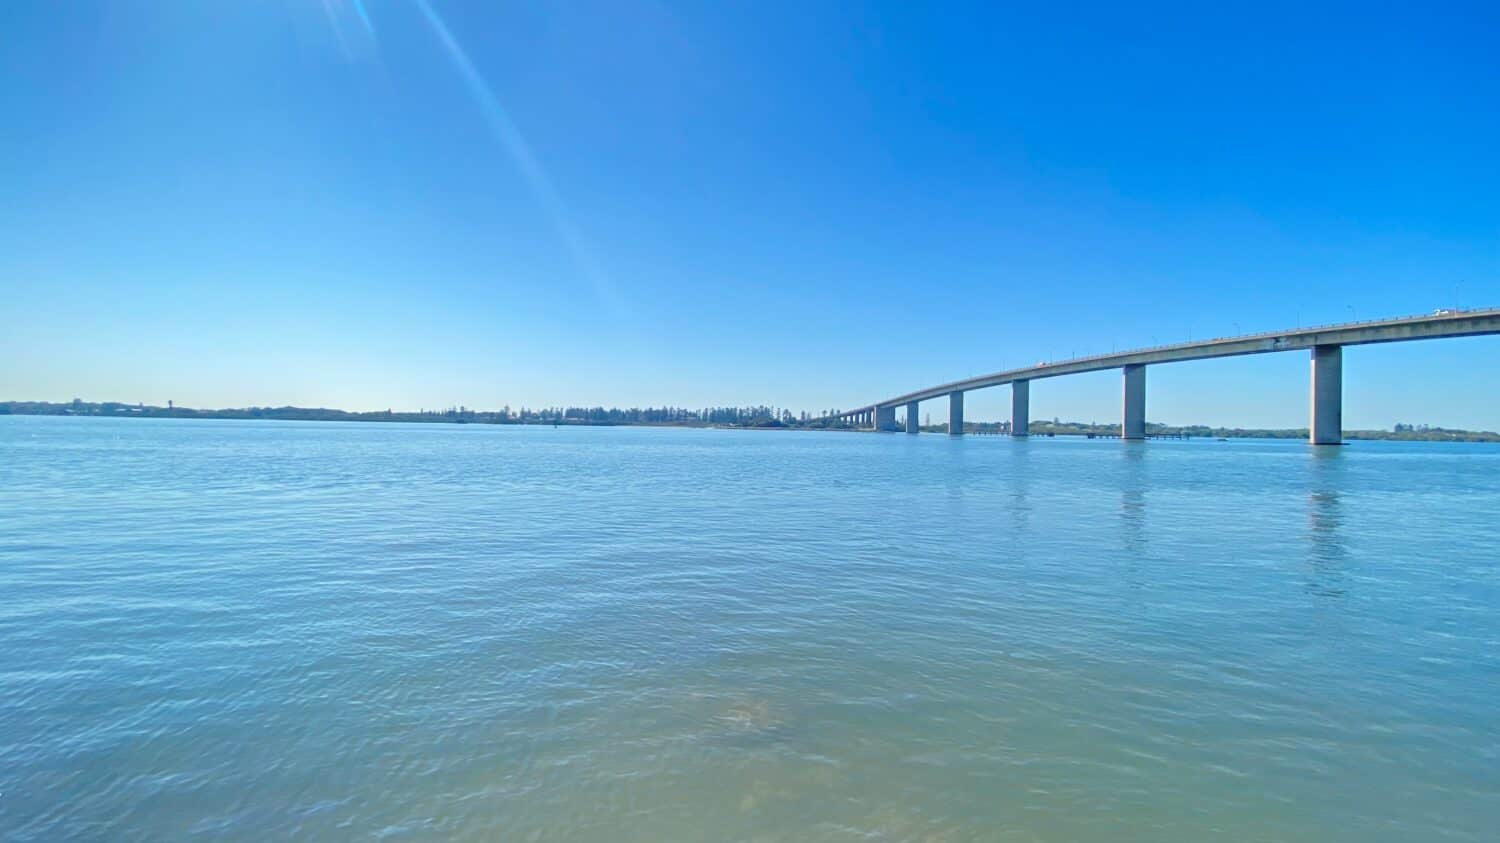 stockton bridge photo in hot summer day with blue sky and blue water.